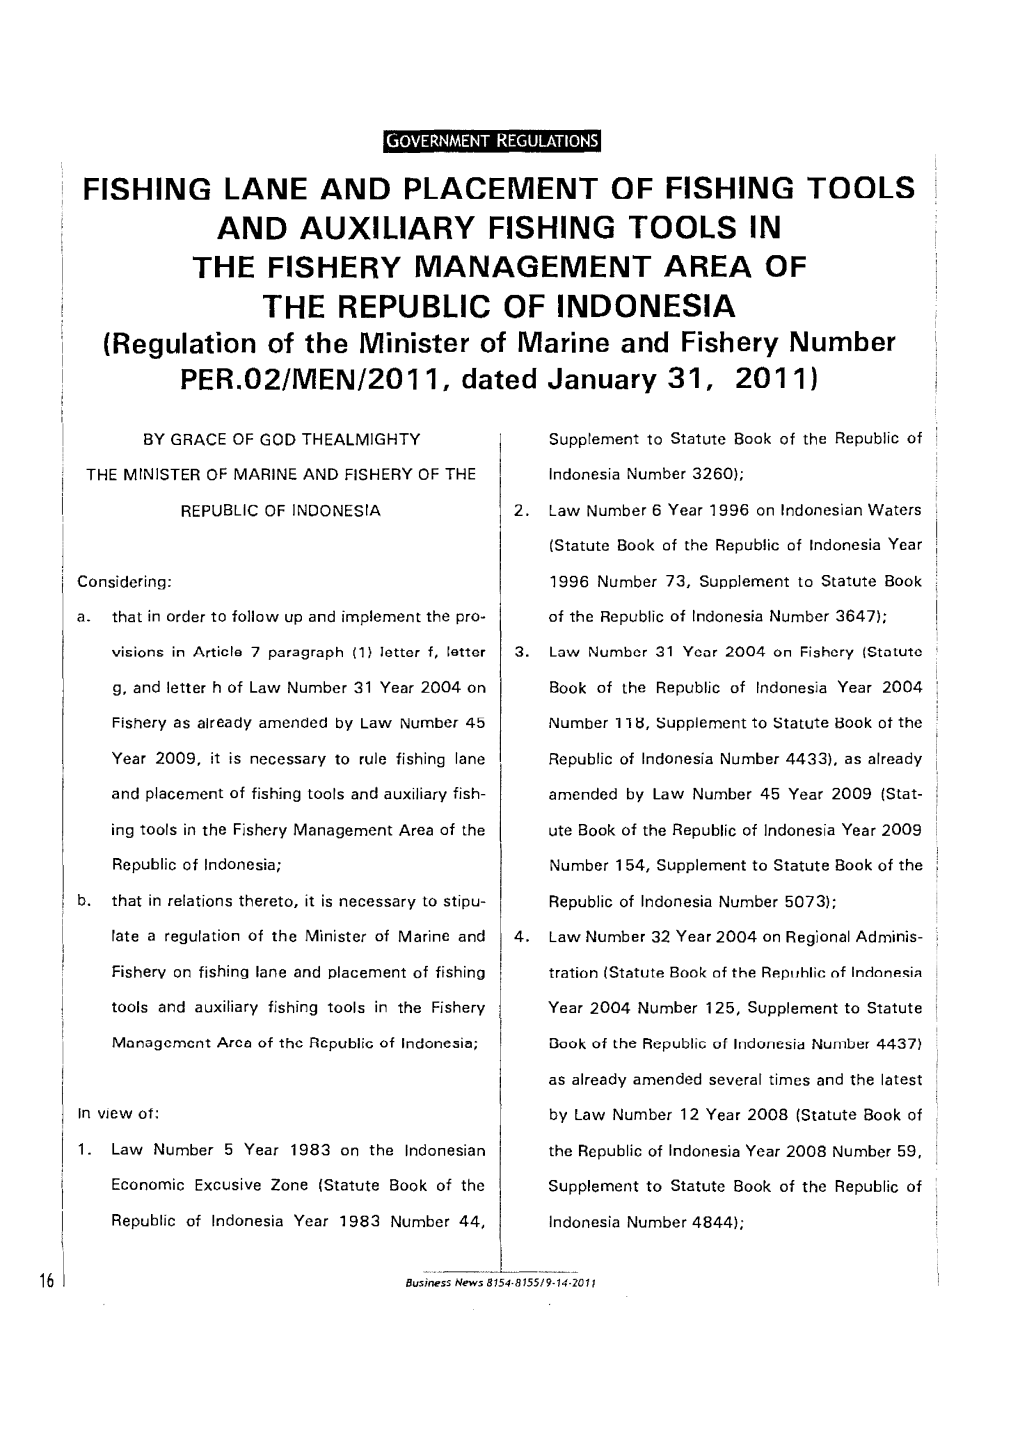 Fishing Lane and Placement of Fishing Tools and Auxiliary